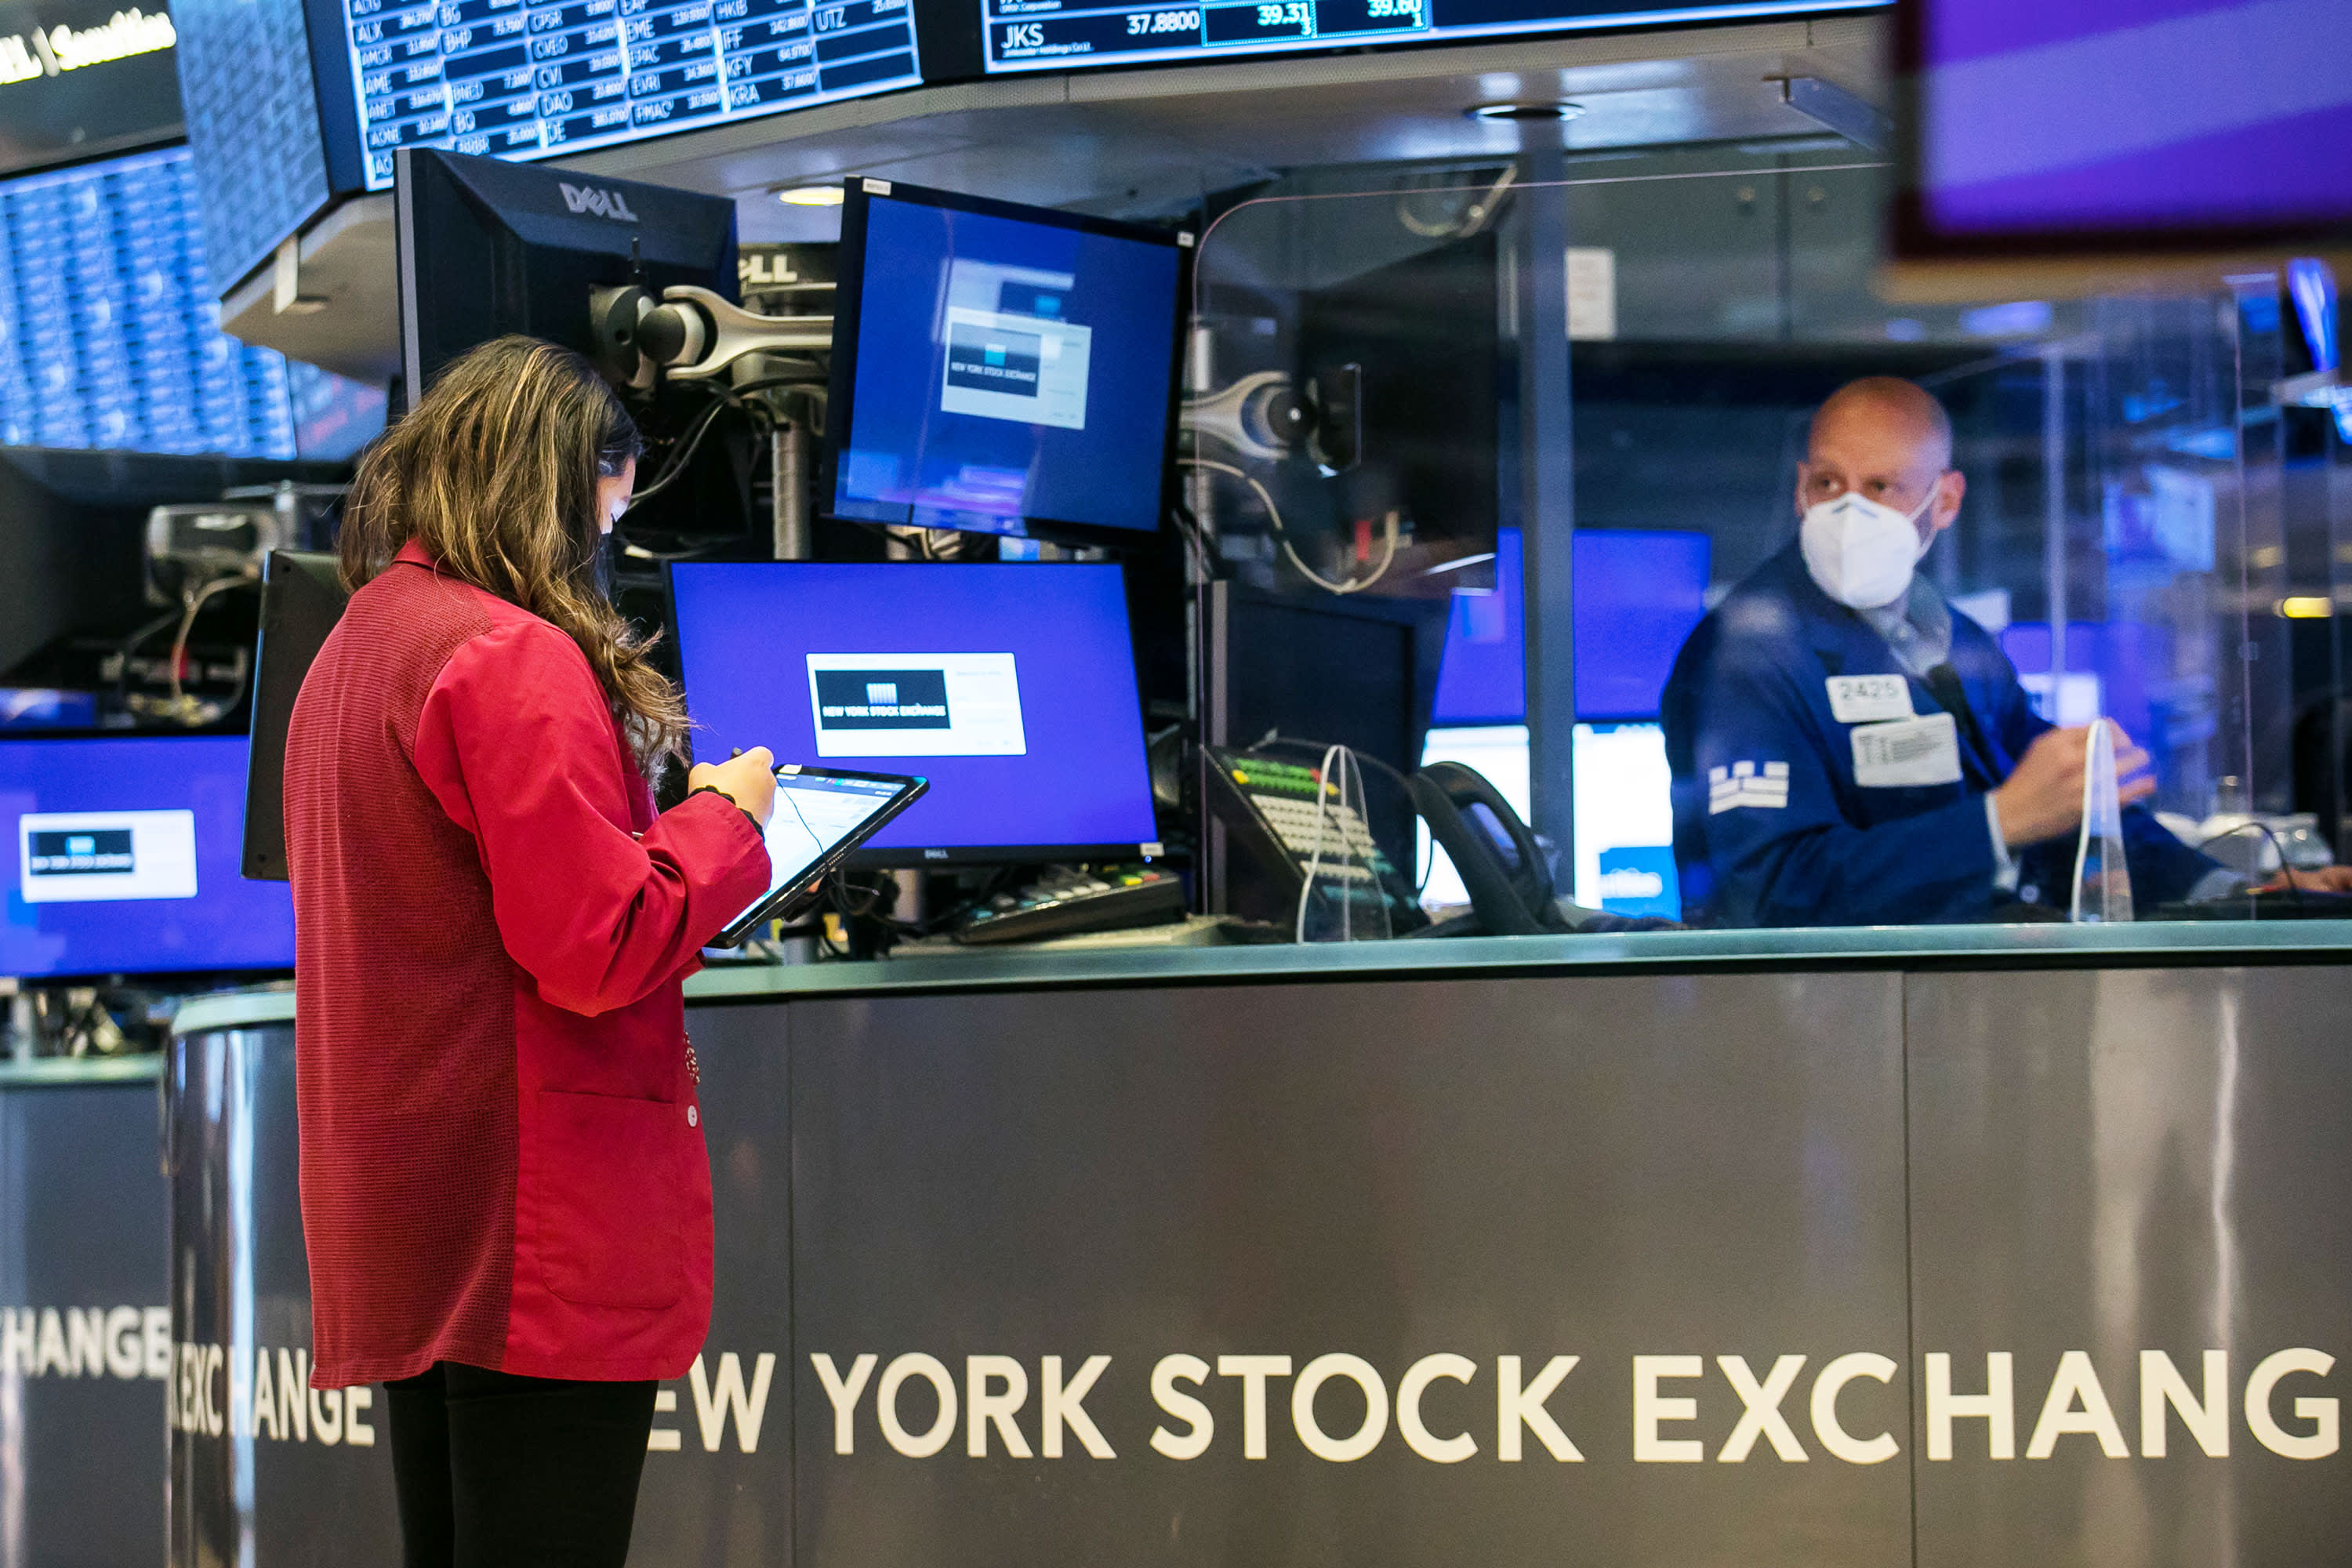 Record run of the US stock exchanges slowed down